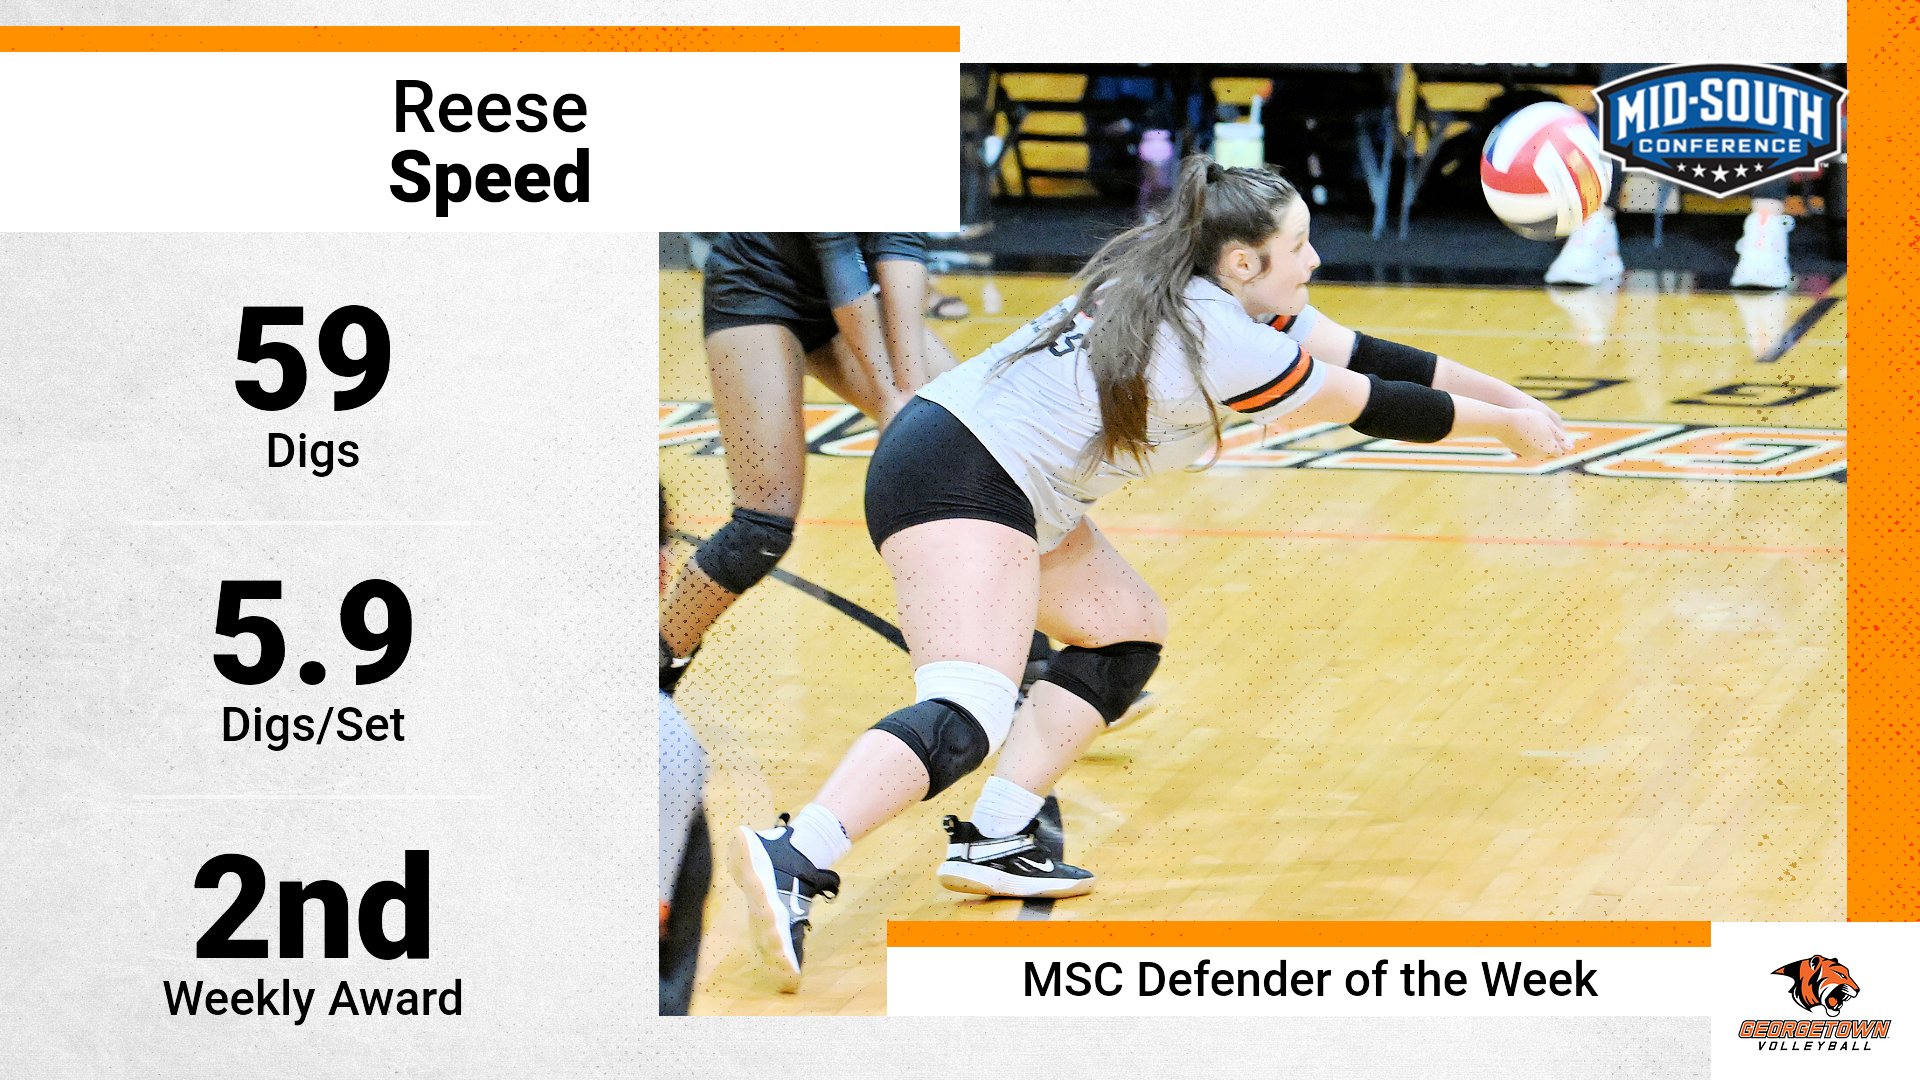 Speed named MSC Defender of the Week for 2nd time